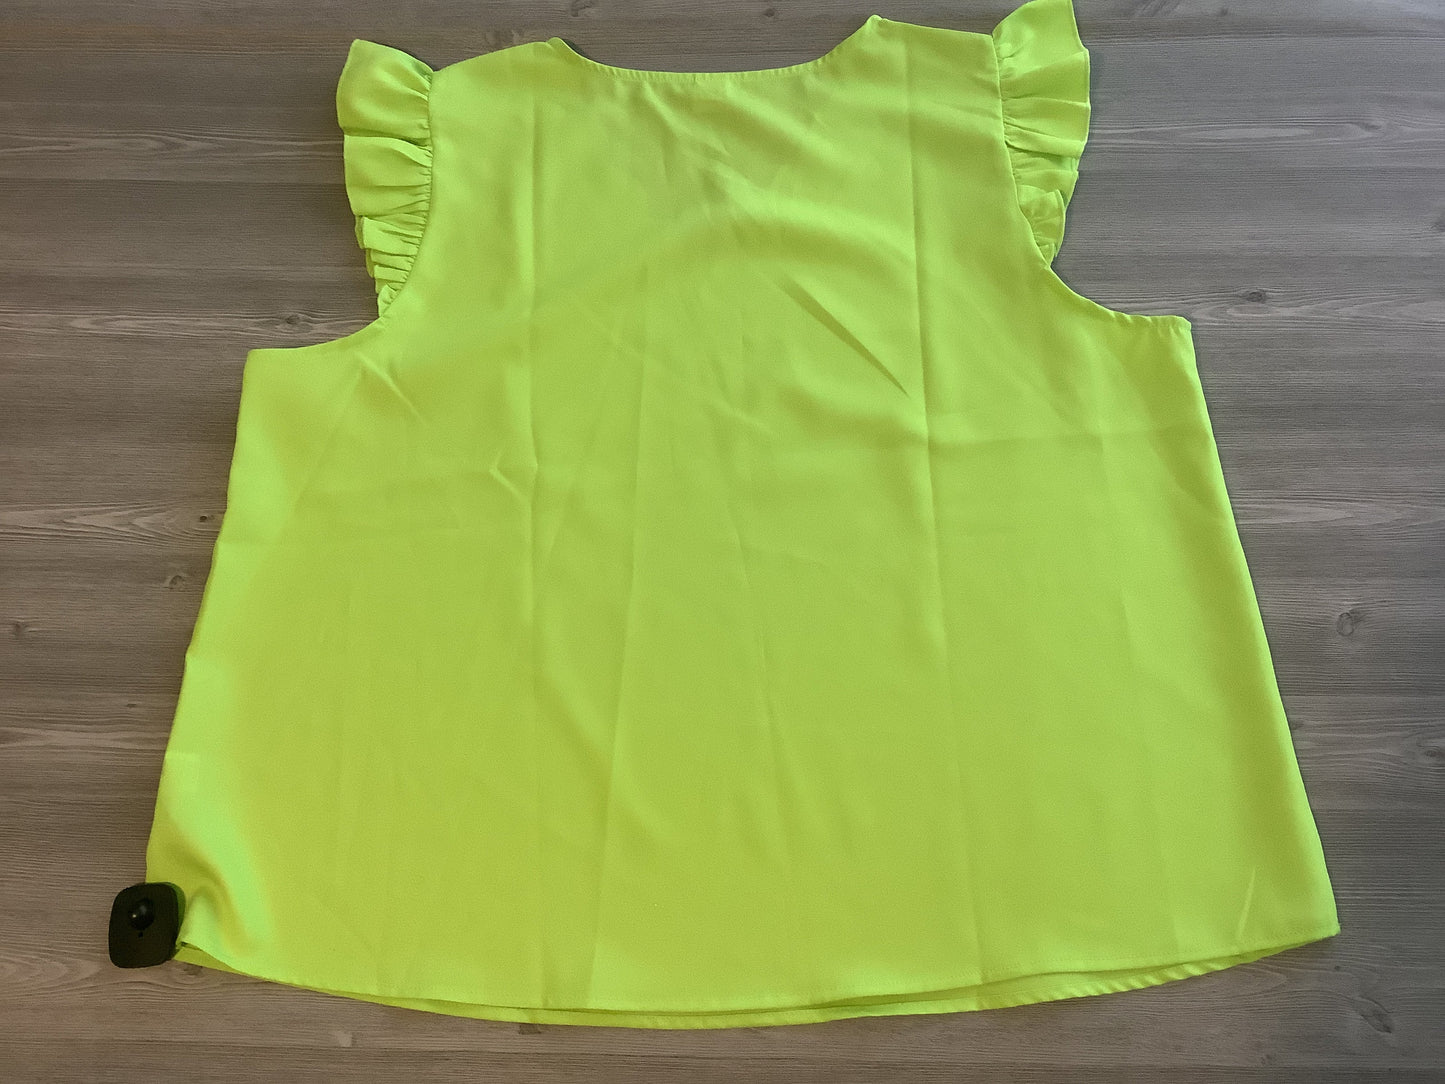 Green Top Sleeveless Sew In Love, Size 2x